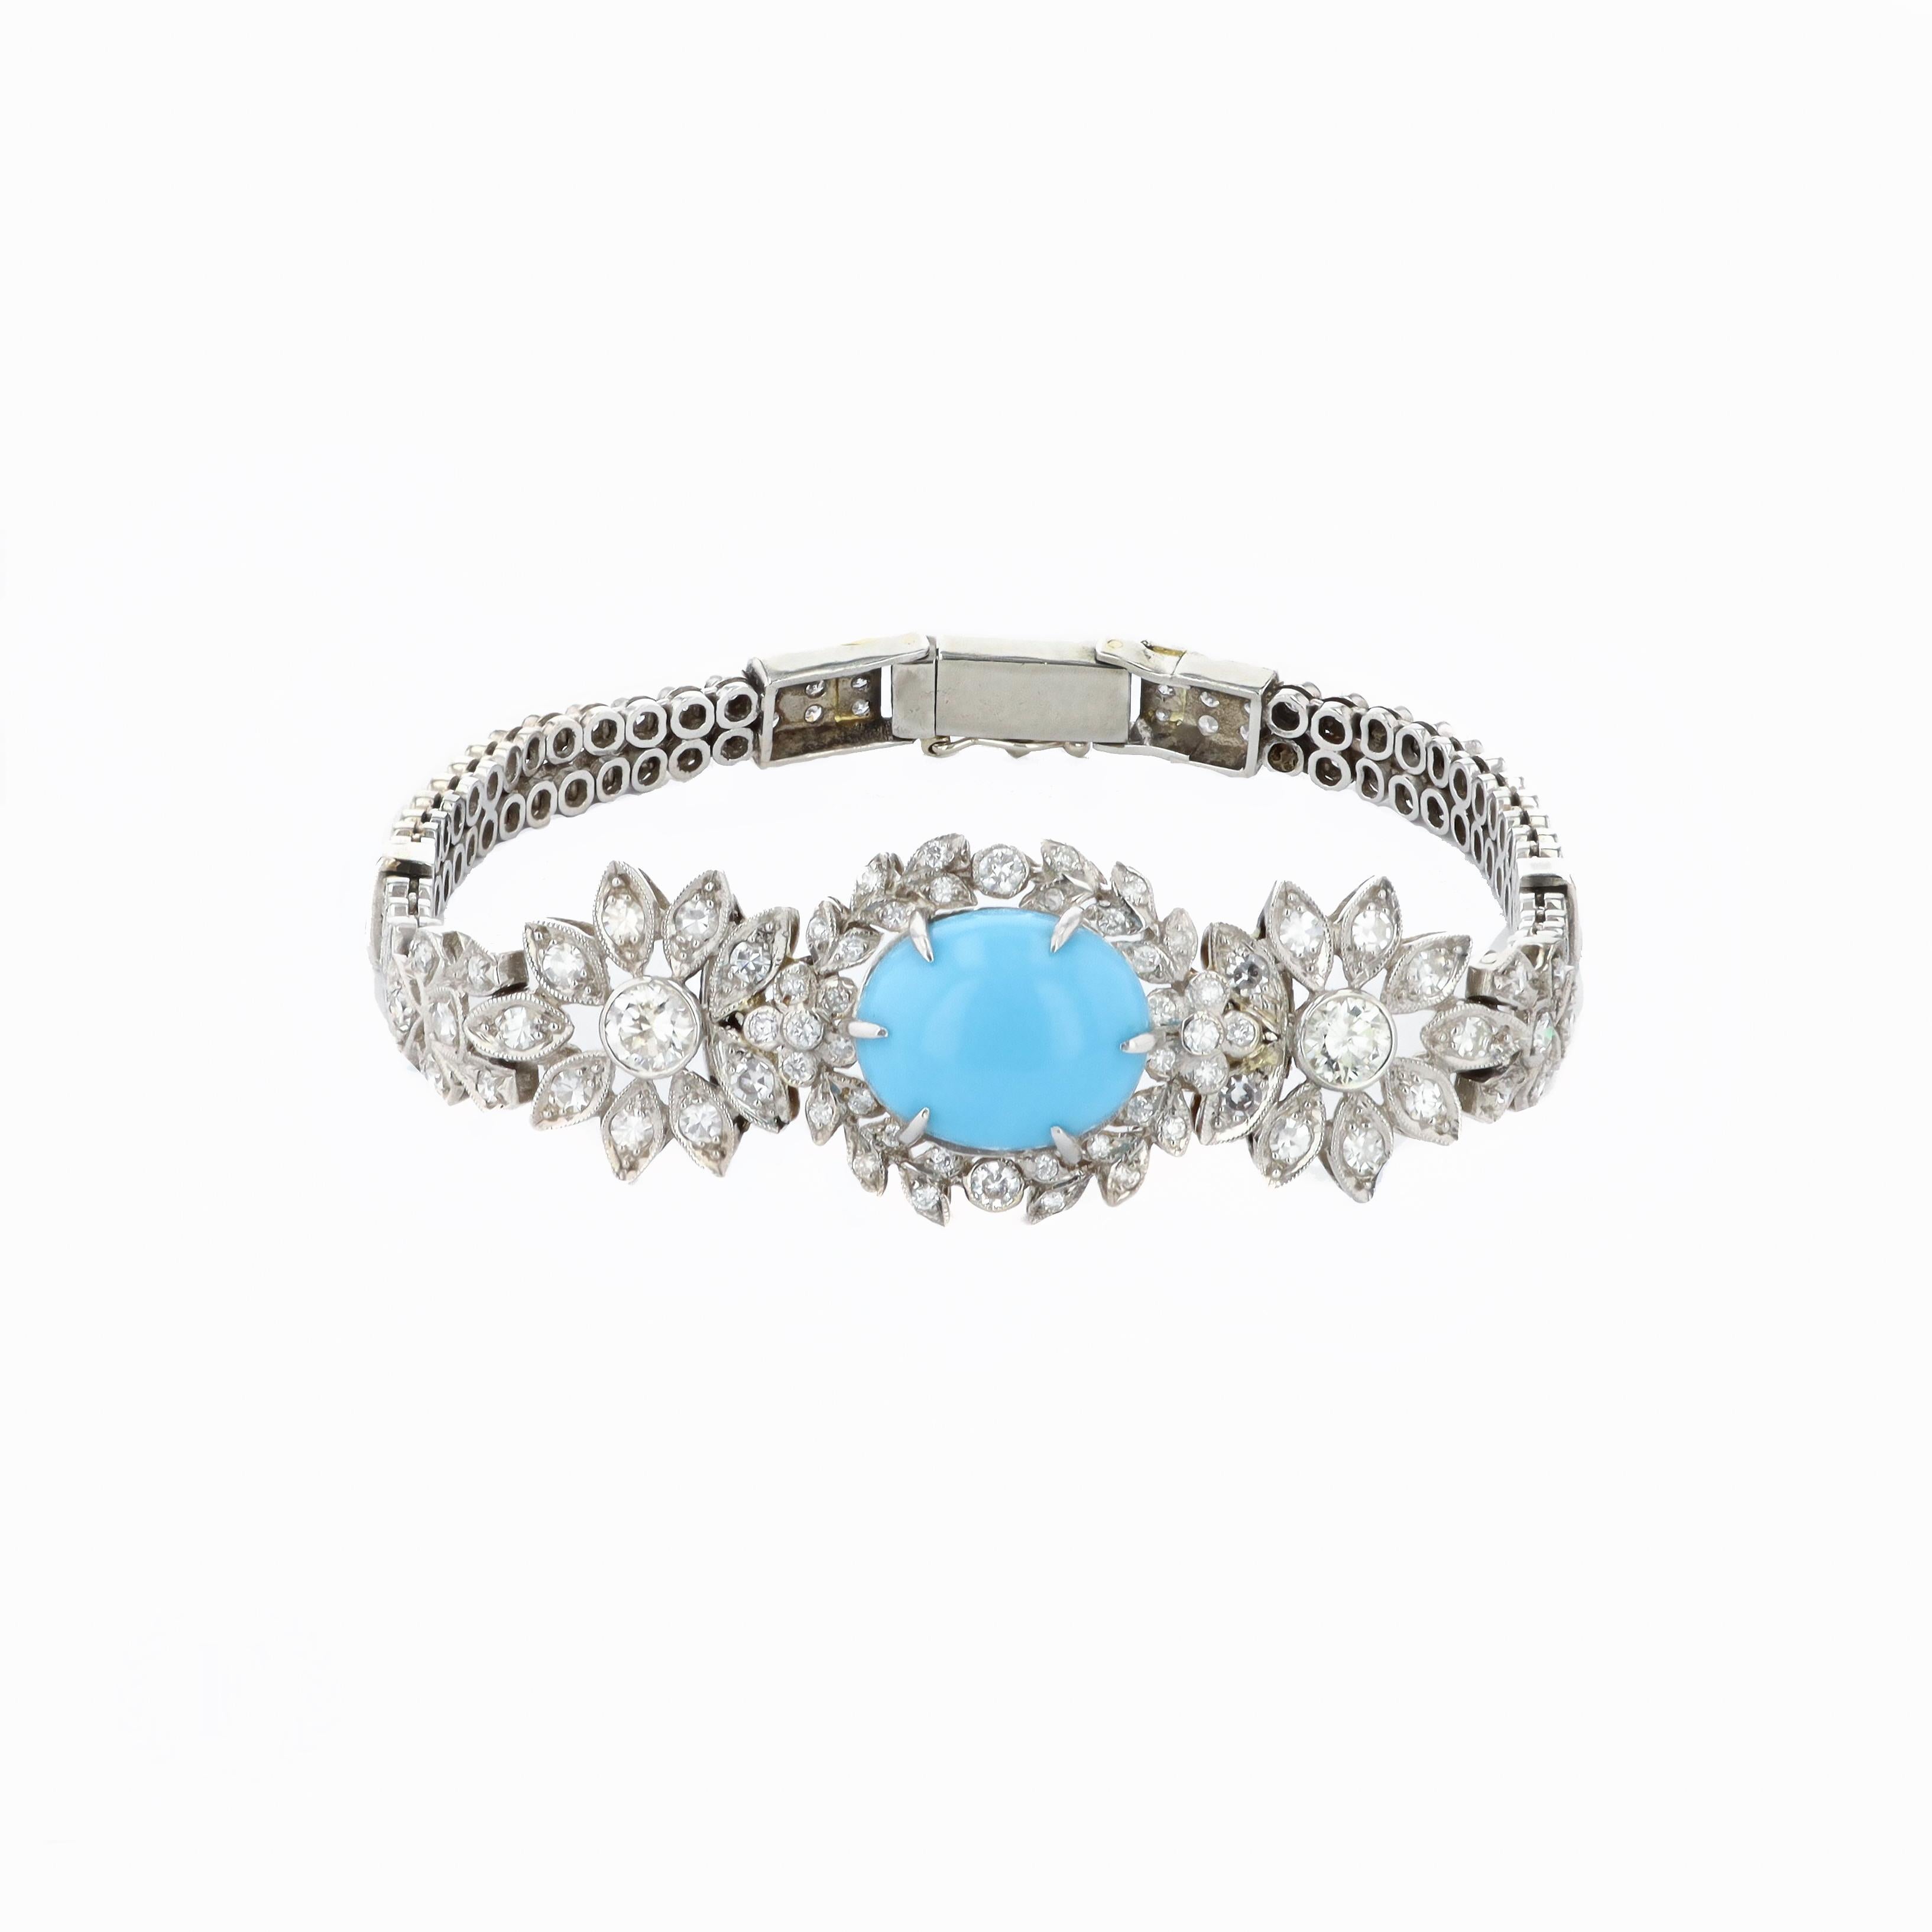 One platinum and diamond estate bracelet containing one cabochon turquoise in the center, and 179 round and 2 baguette diamonds weighing approximately 4.00 carats